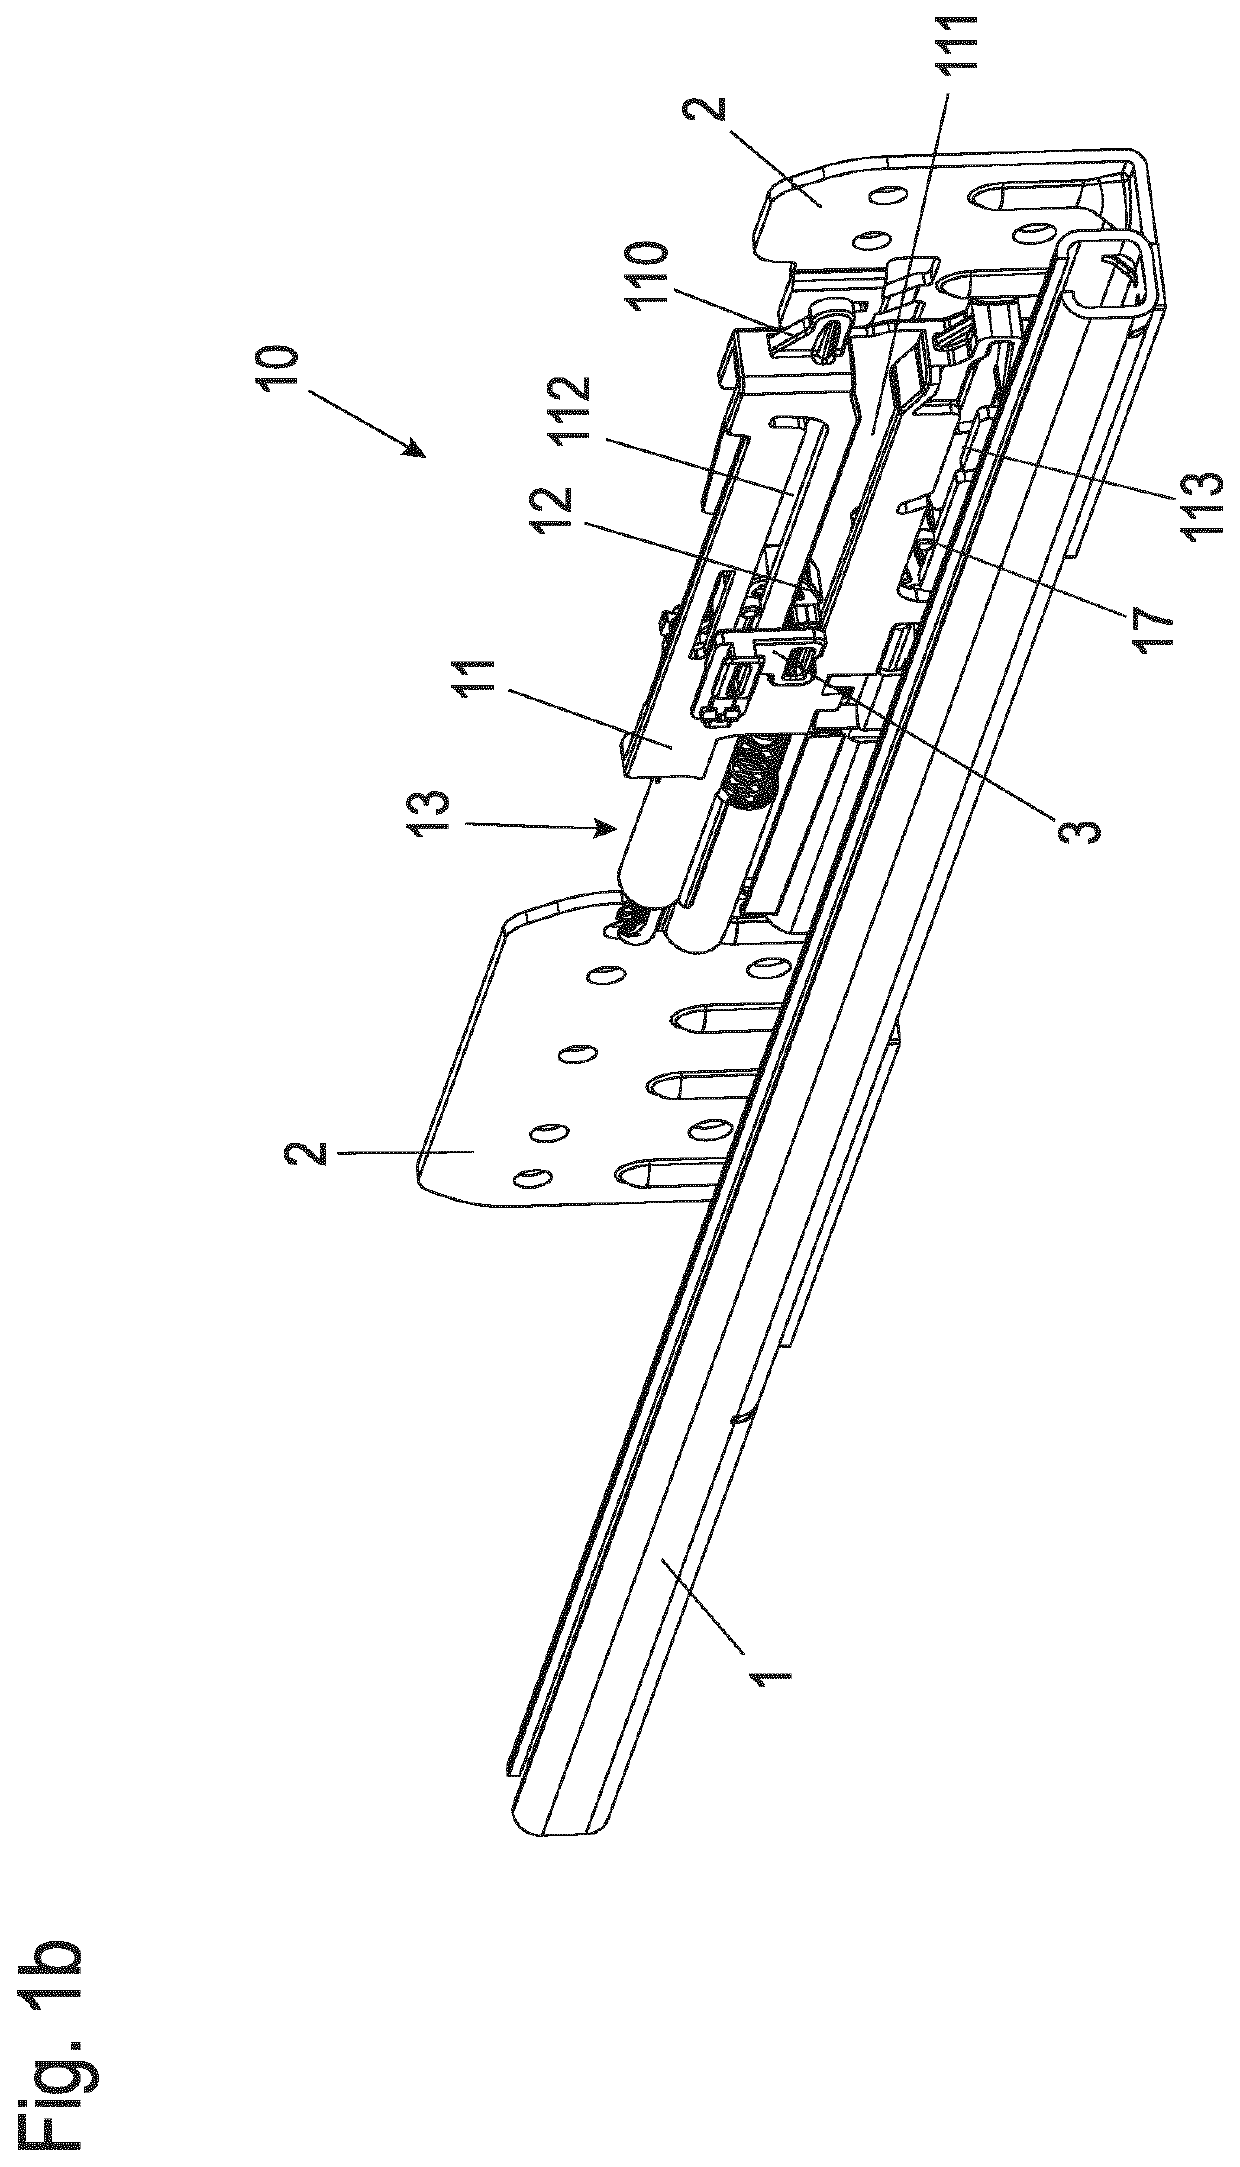 Self-retracting and damping device for a drawer element, and piece of furniture or domestic appliance having at least one drawer element